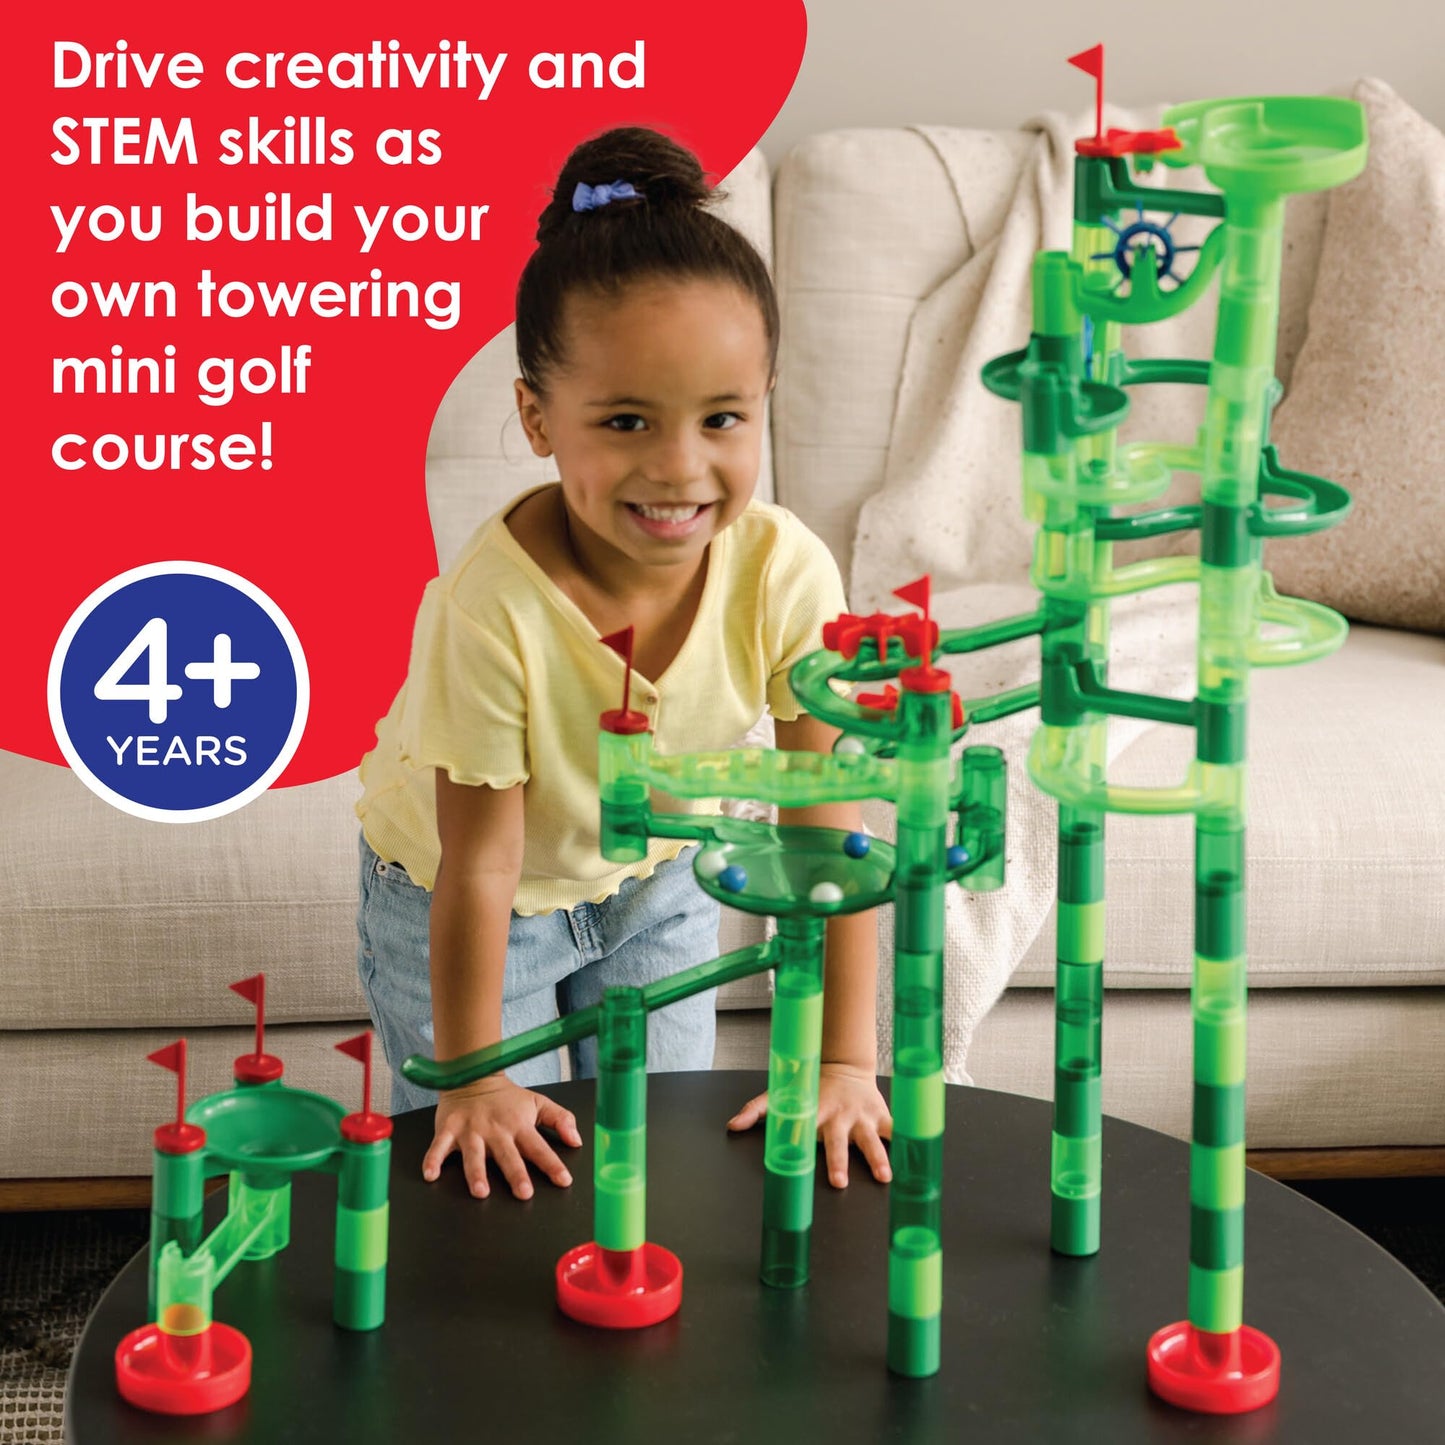 MindWare Marble Run Mini Golf - Building Toys for Kids Ages 4-8 - Unique Twist on Classic Marble Run for Kids Ages 4-8 - Marble Maze Includes 75 Track Pieces, 20 Marbles and Exciting New Components